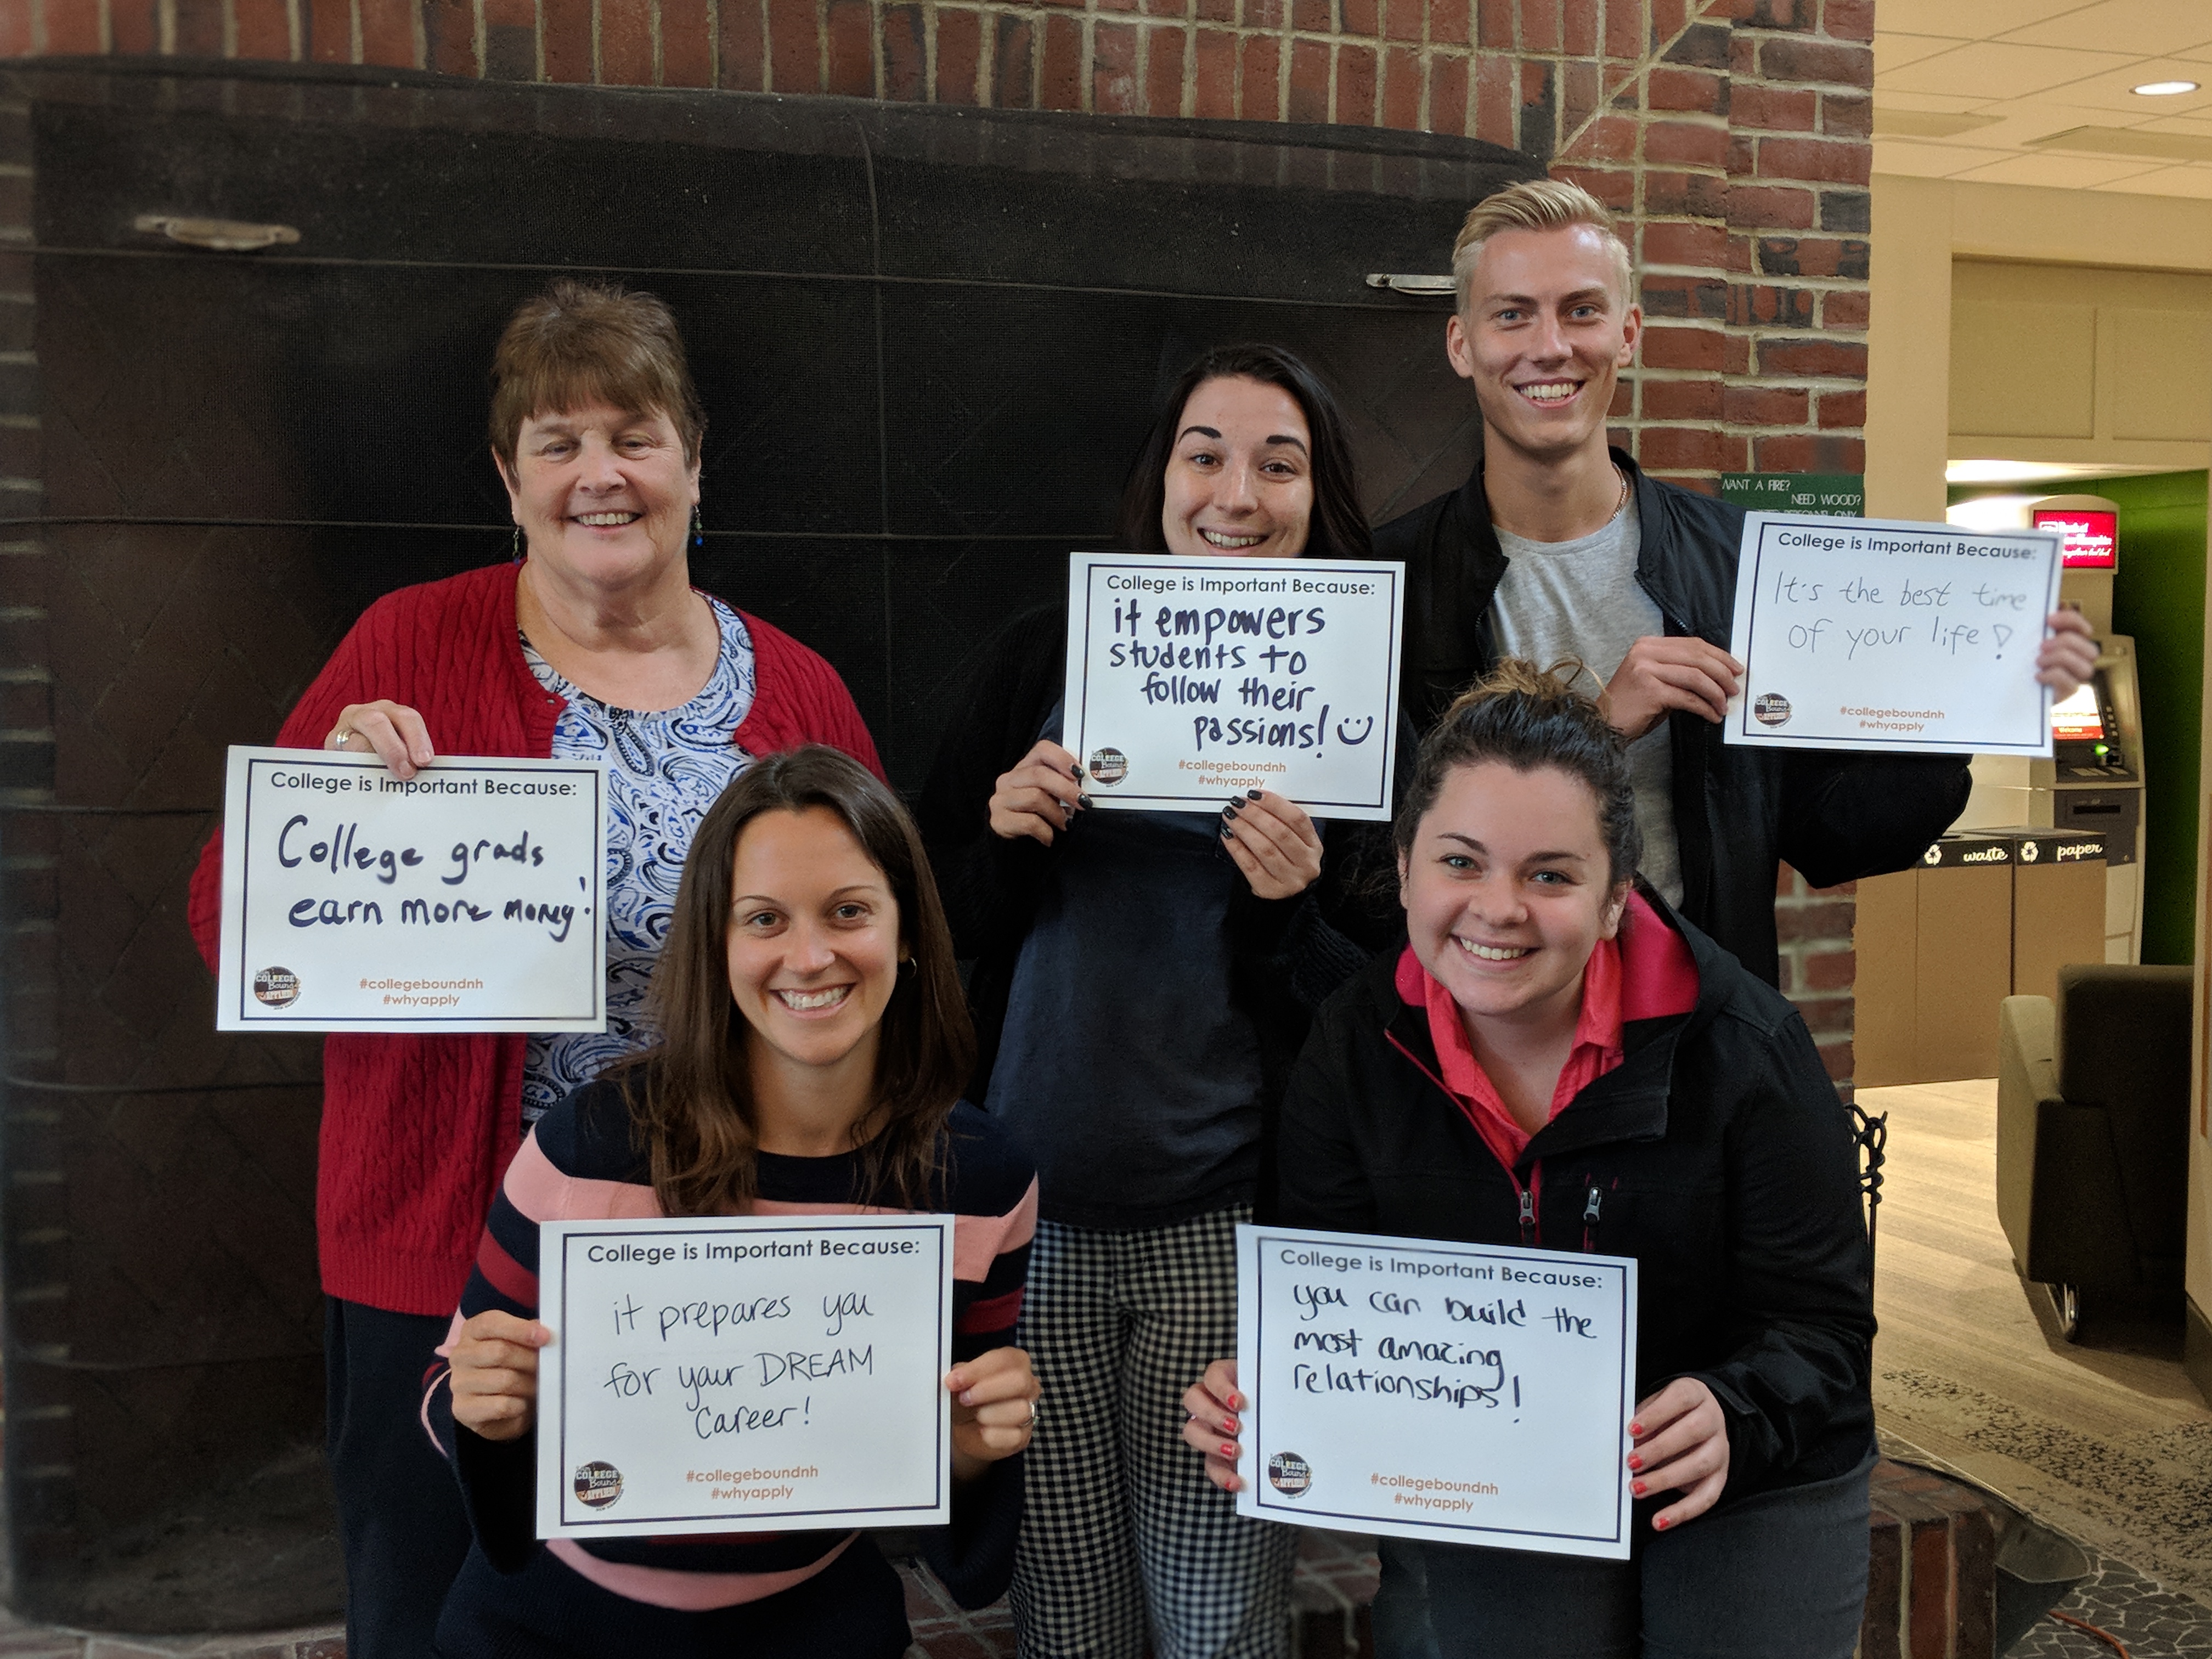 This year, PSU participated in the national #WhyApply Day.